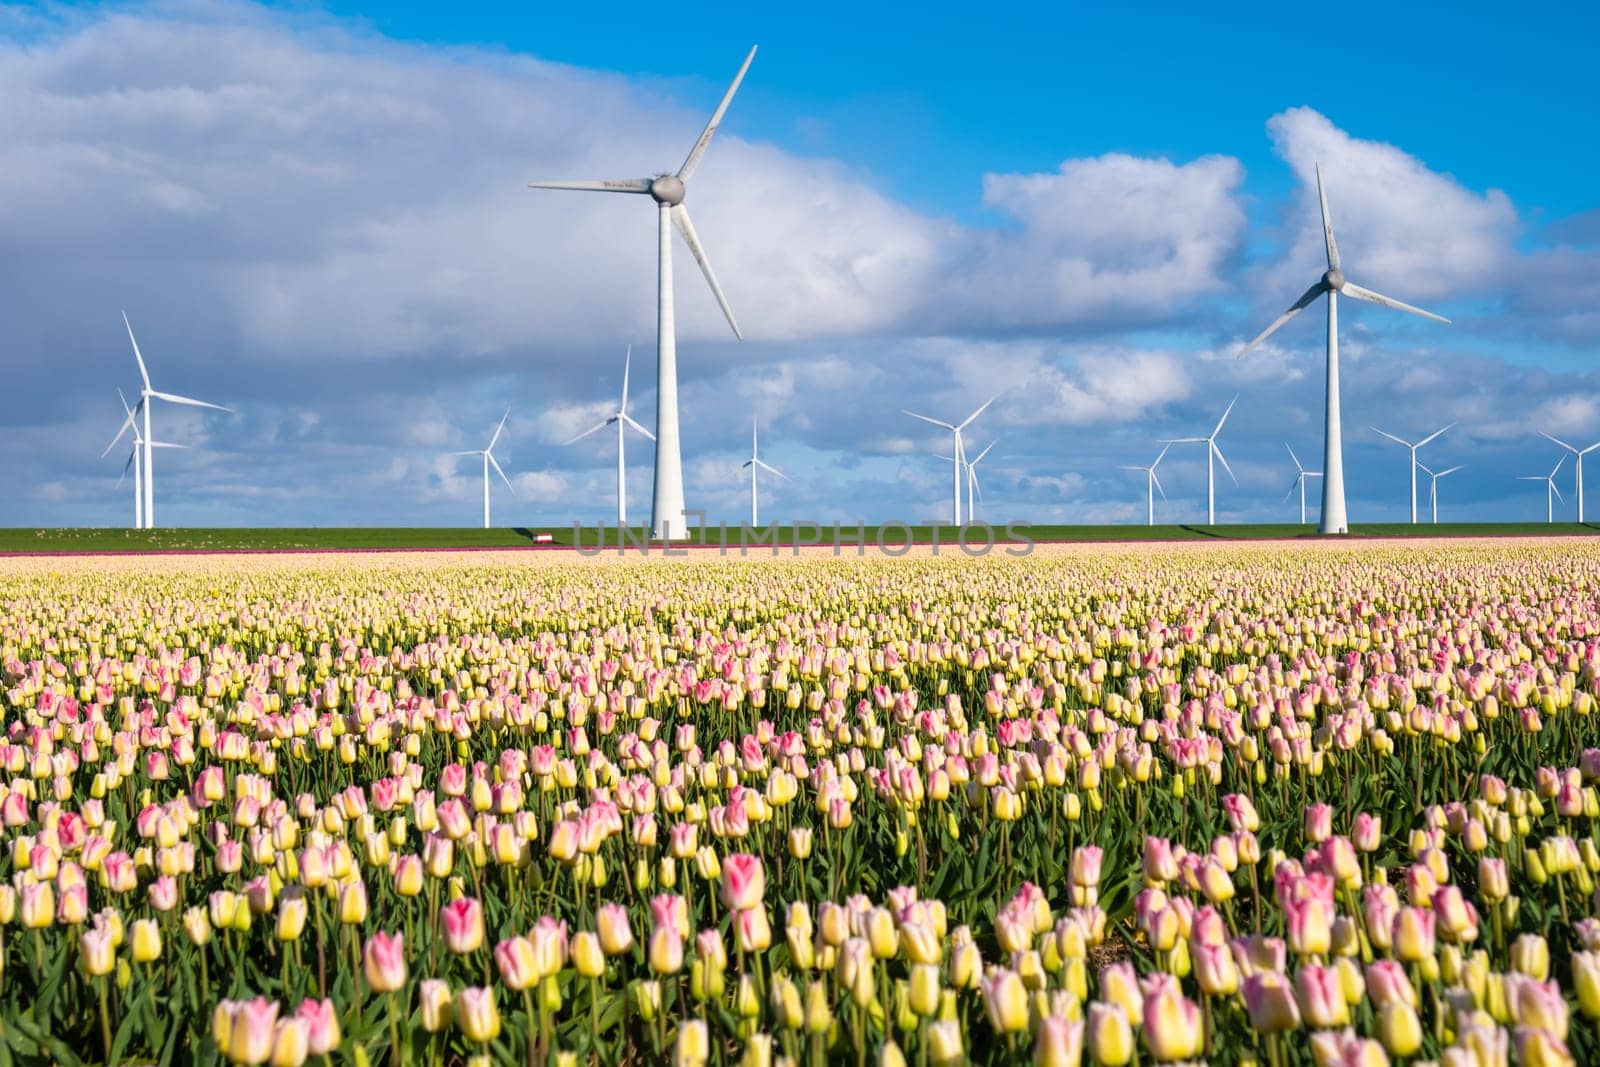 Vibrant tulips sway gracefully in a field as majestic windmills stand tall in the background, creating a picturesque scene of Dutch countryside in spring. in the Noordoostpolder Netherlands